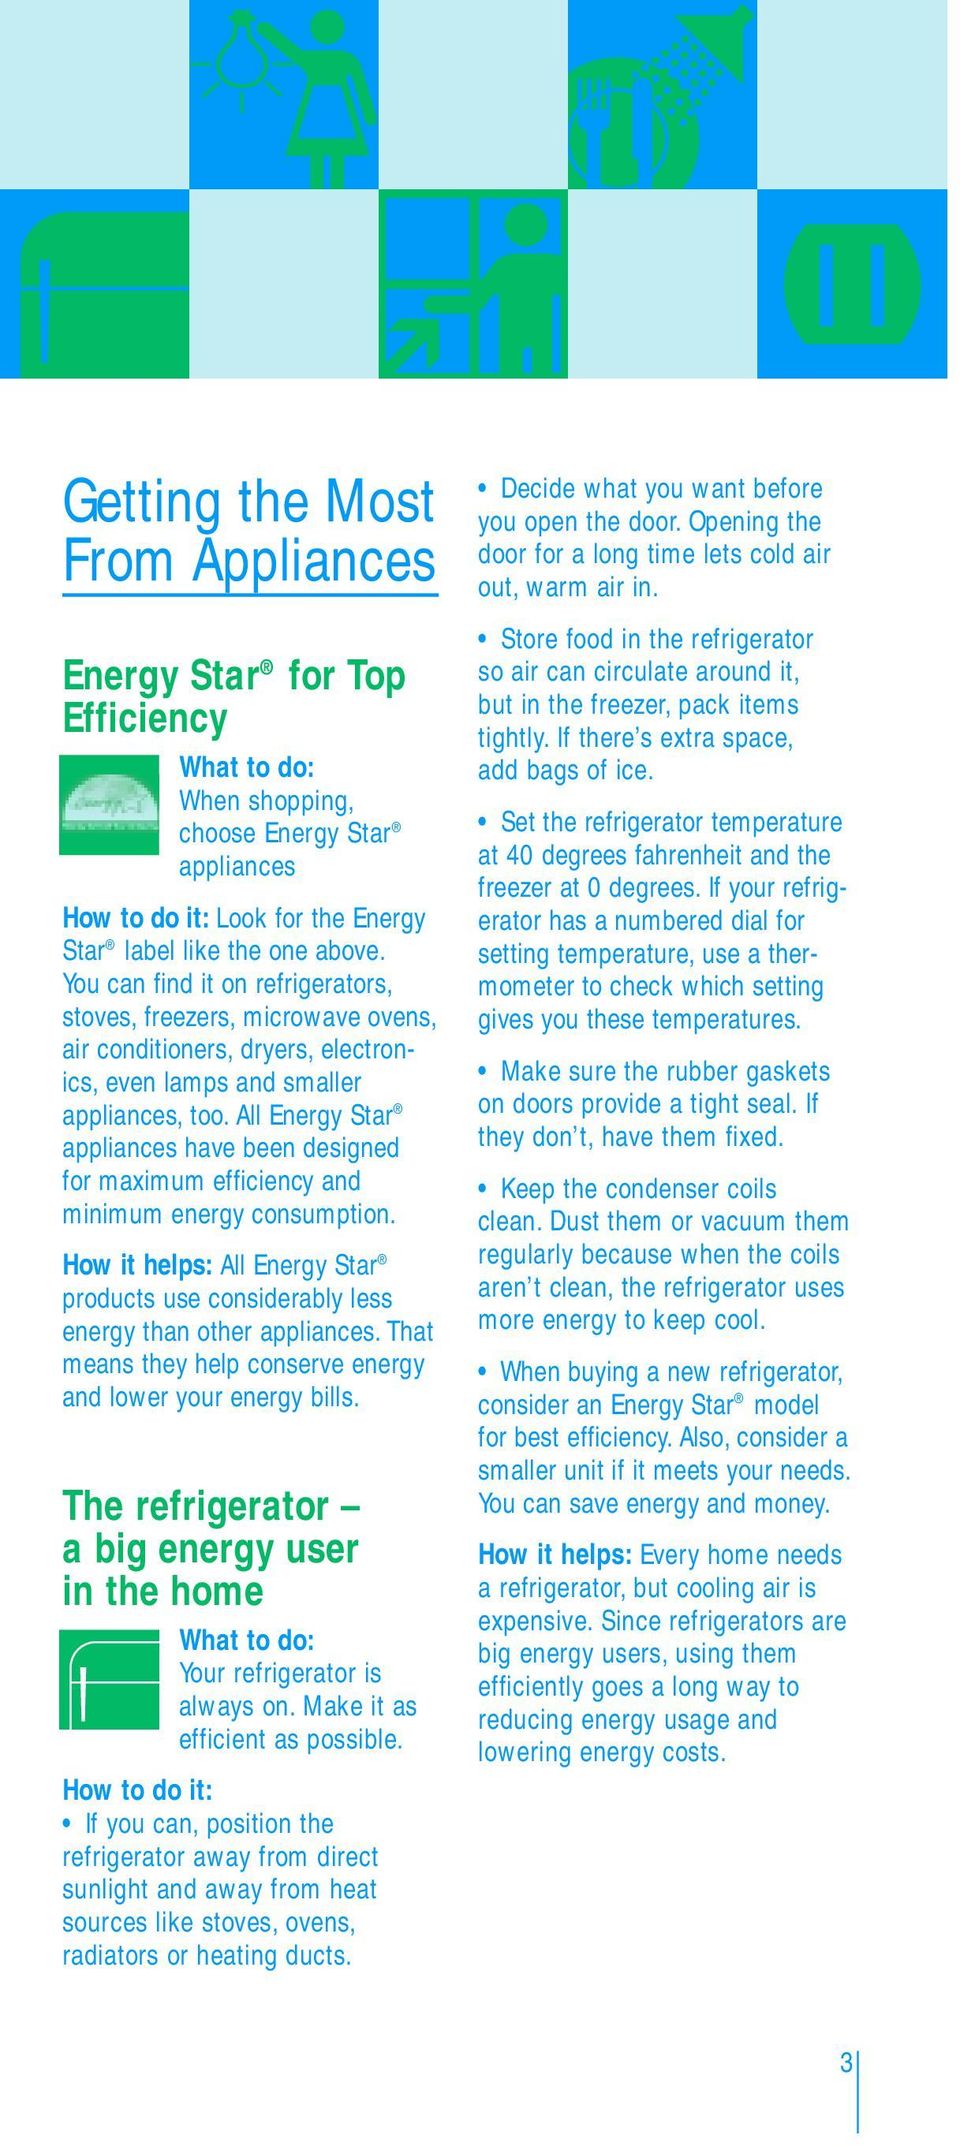 All Energy Star appliances have been designed for maximum efficiency and minimum energy consumption. How it helps: All Energy Star products use considerably less energy than other appliances.